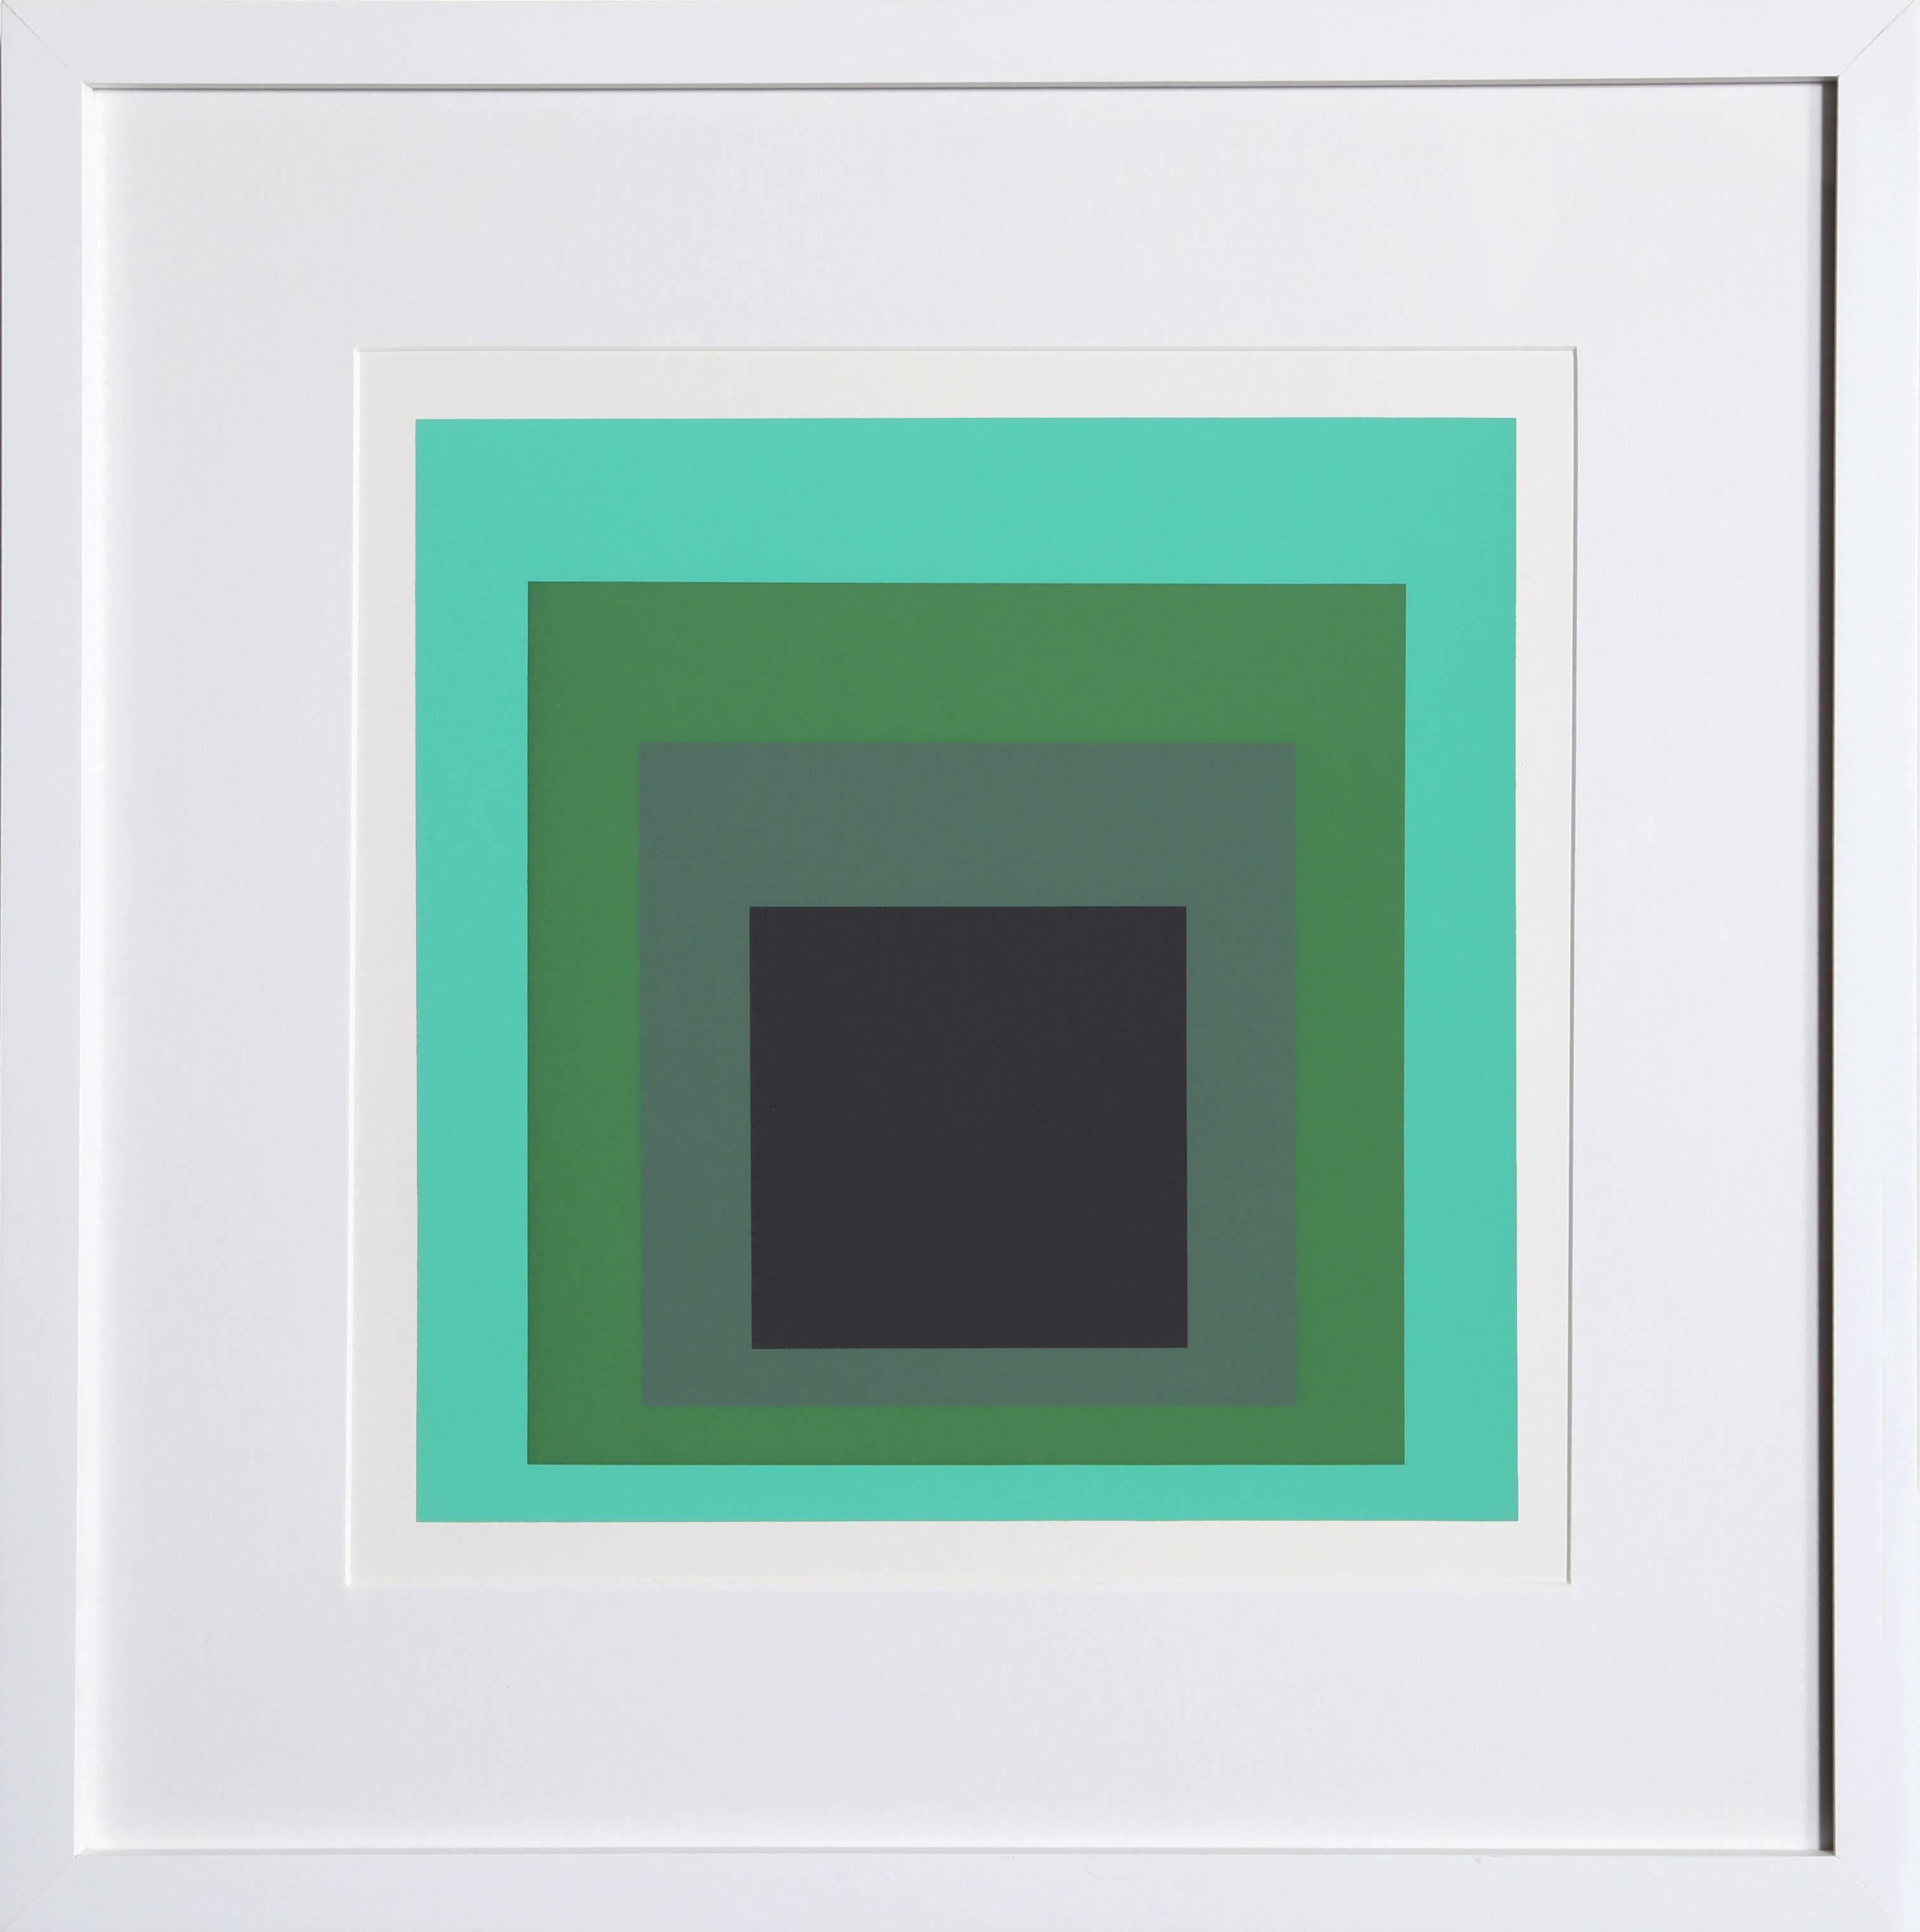 Josef Albers Abstract Print – Homage to the Square from Formulation: Articulation